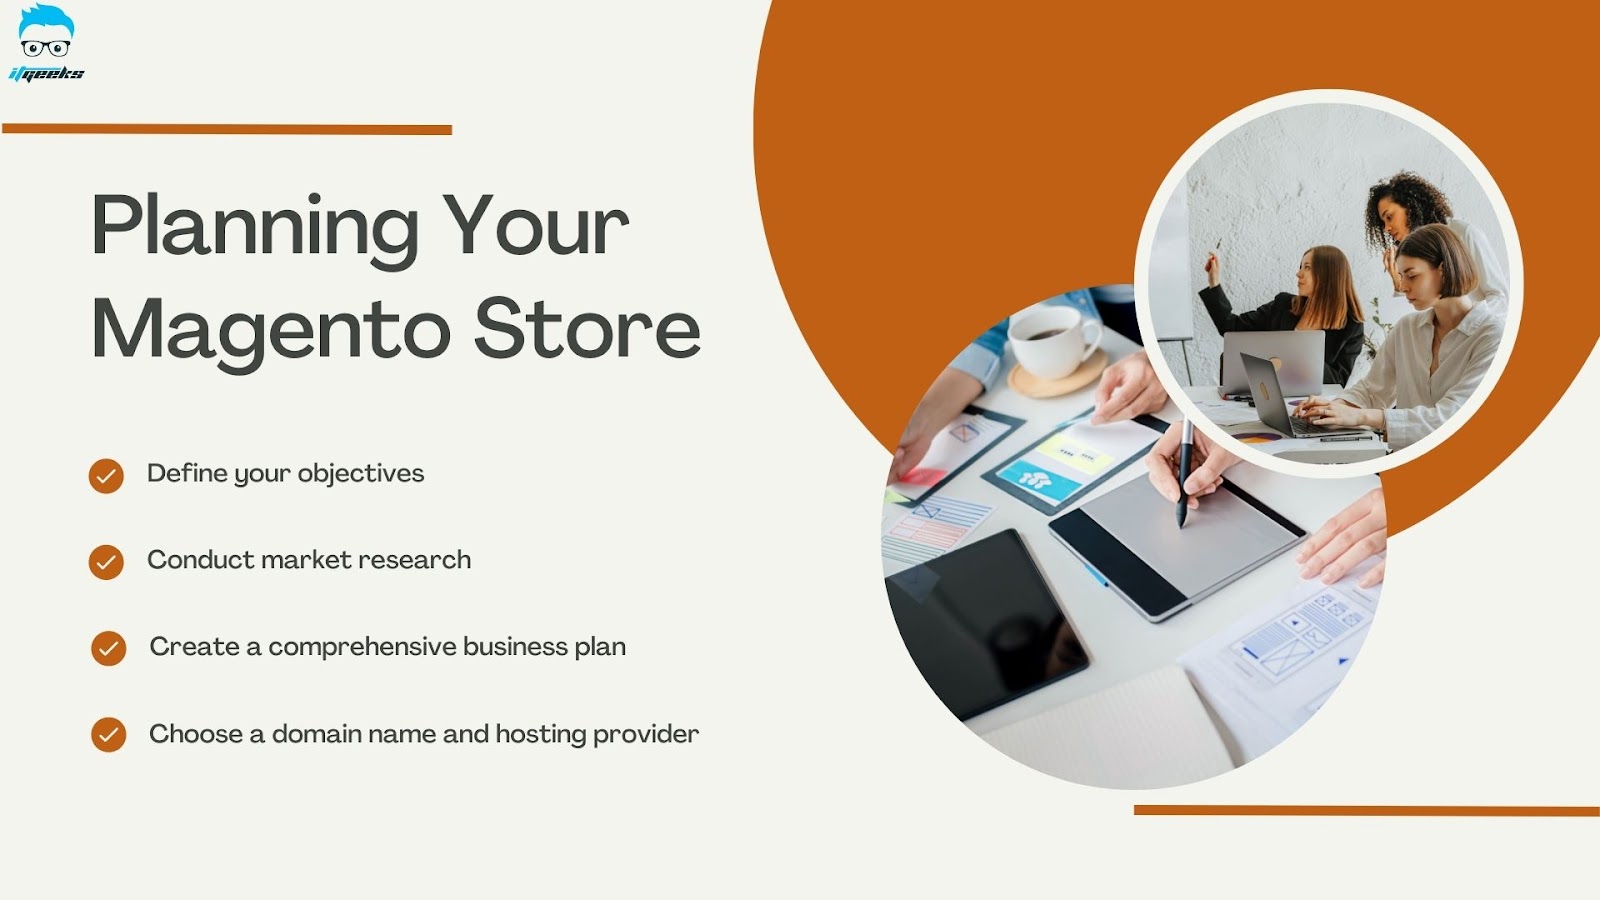 Planning Your Magento Store